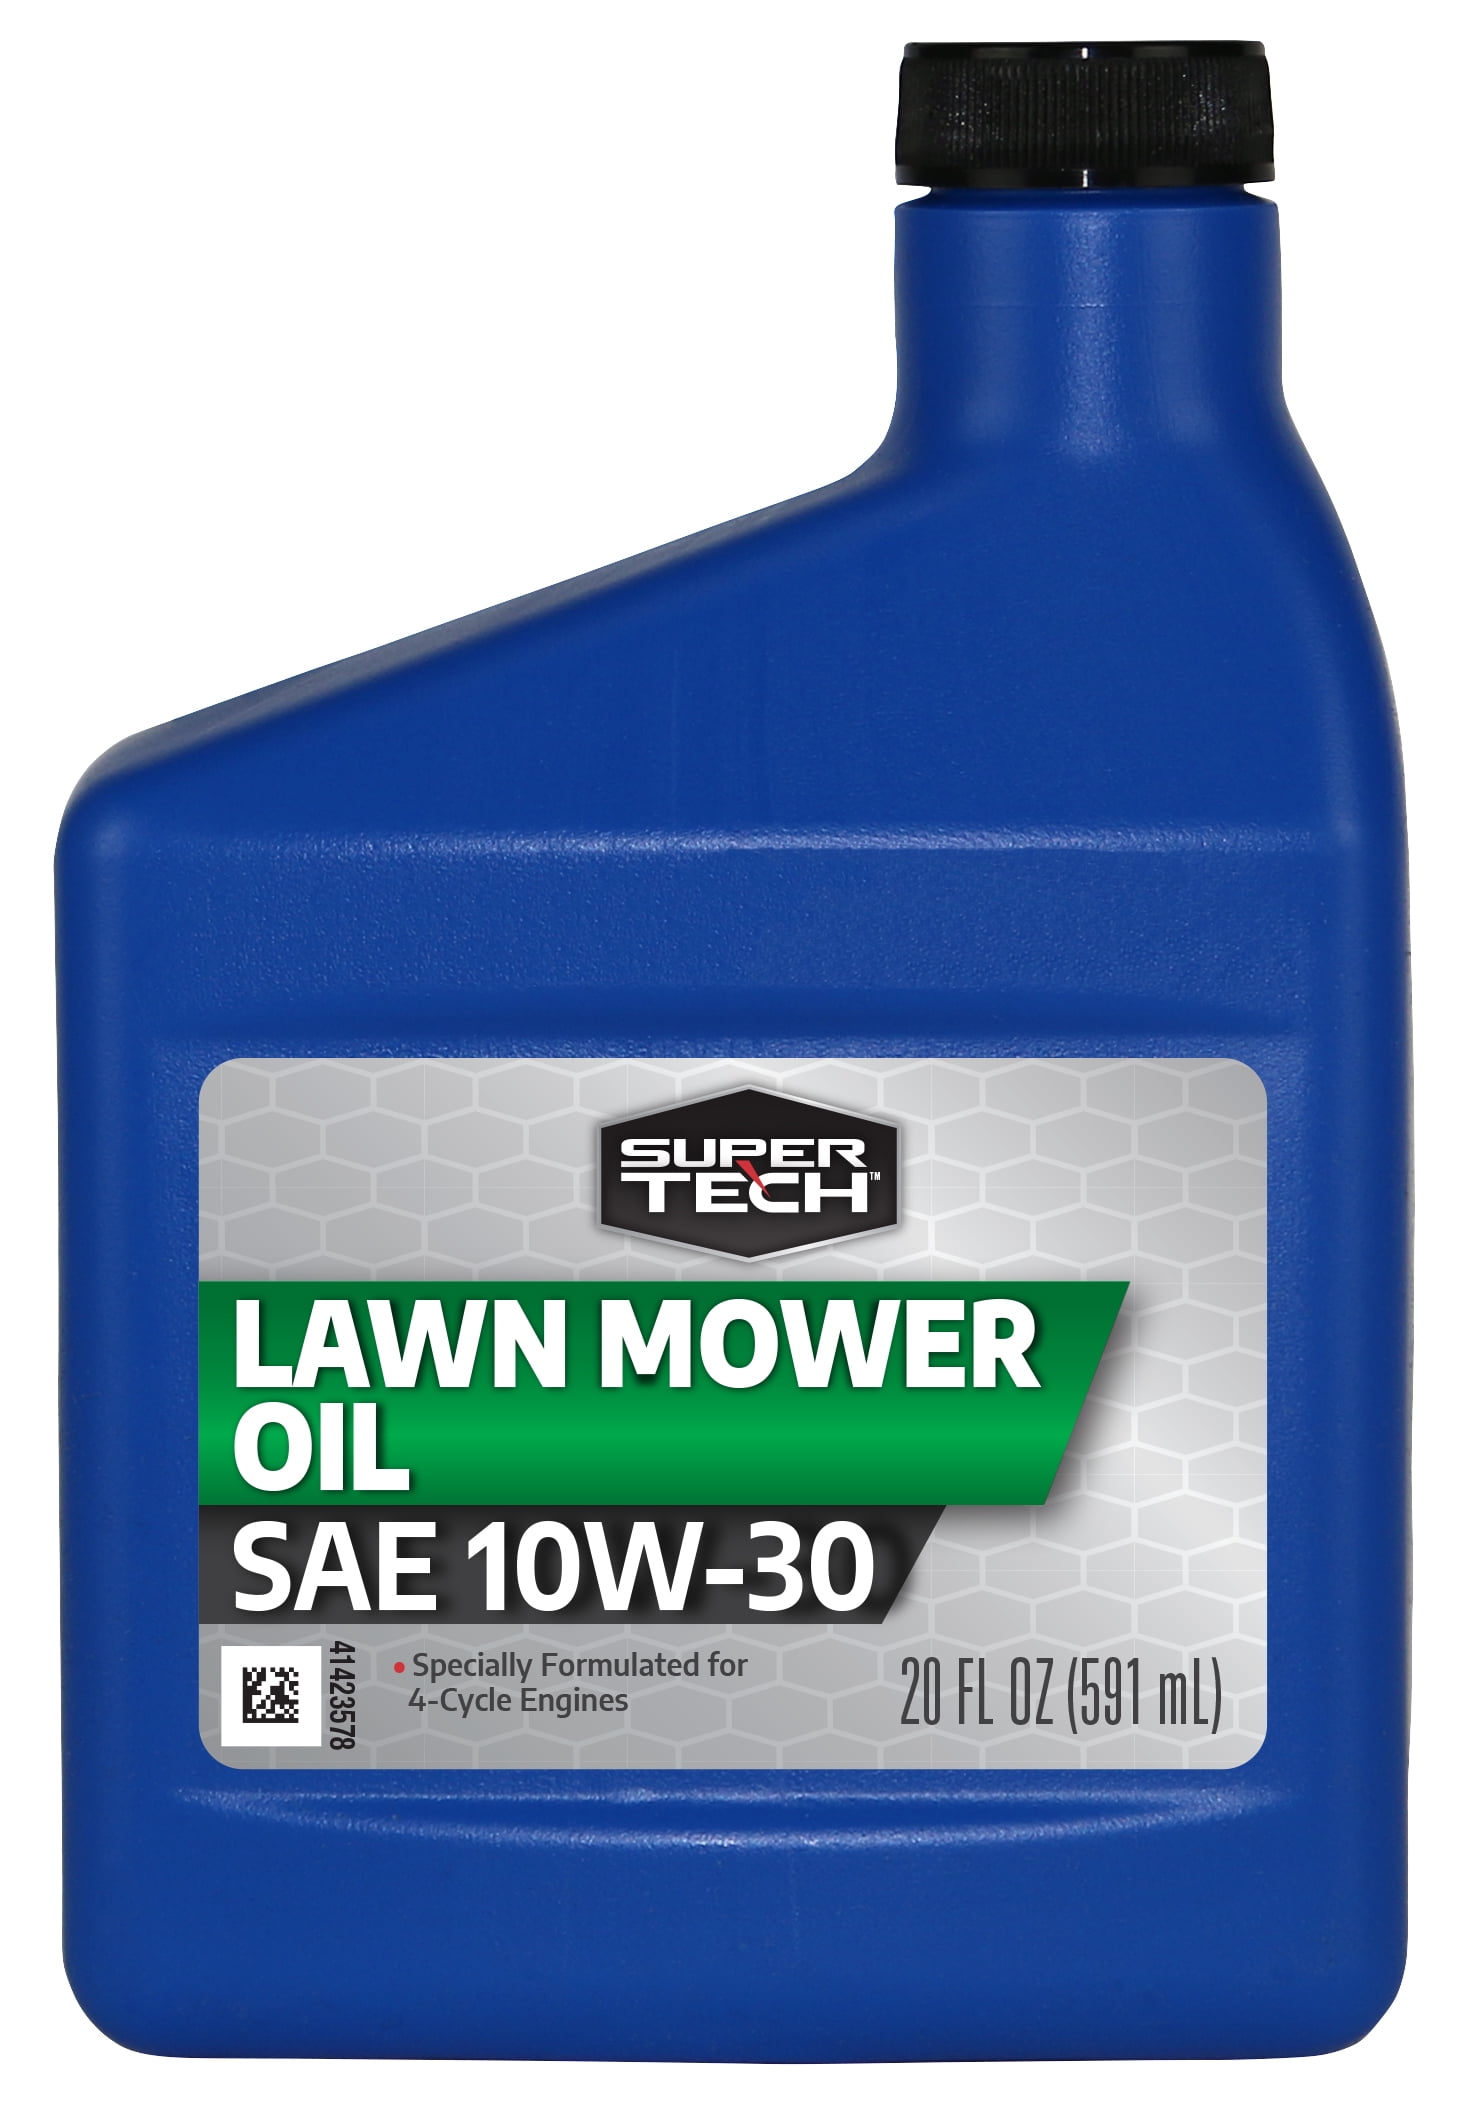 Image of Lawn mower oil